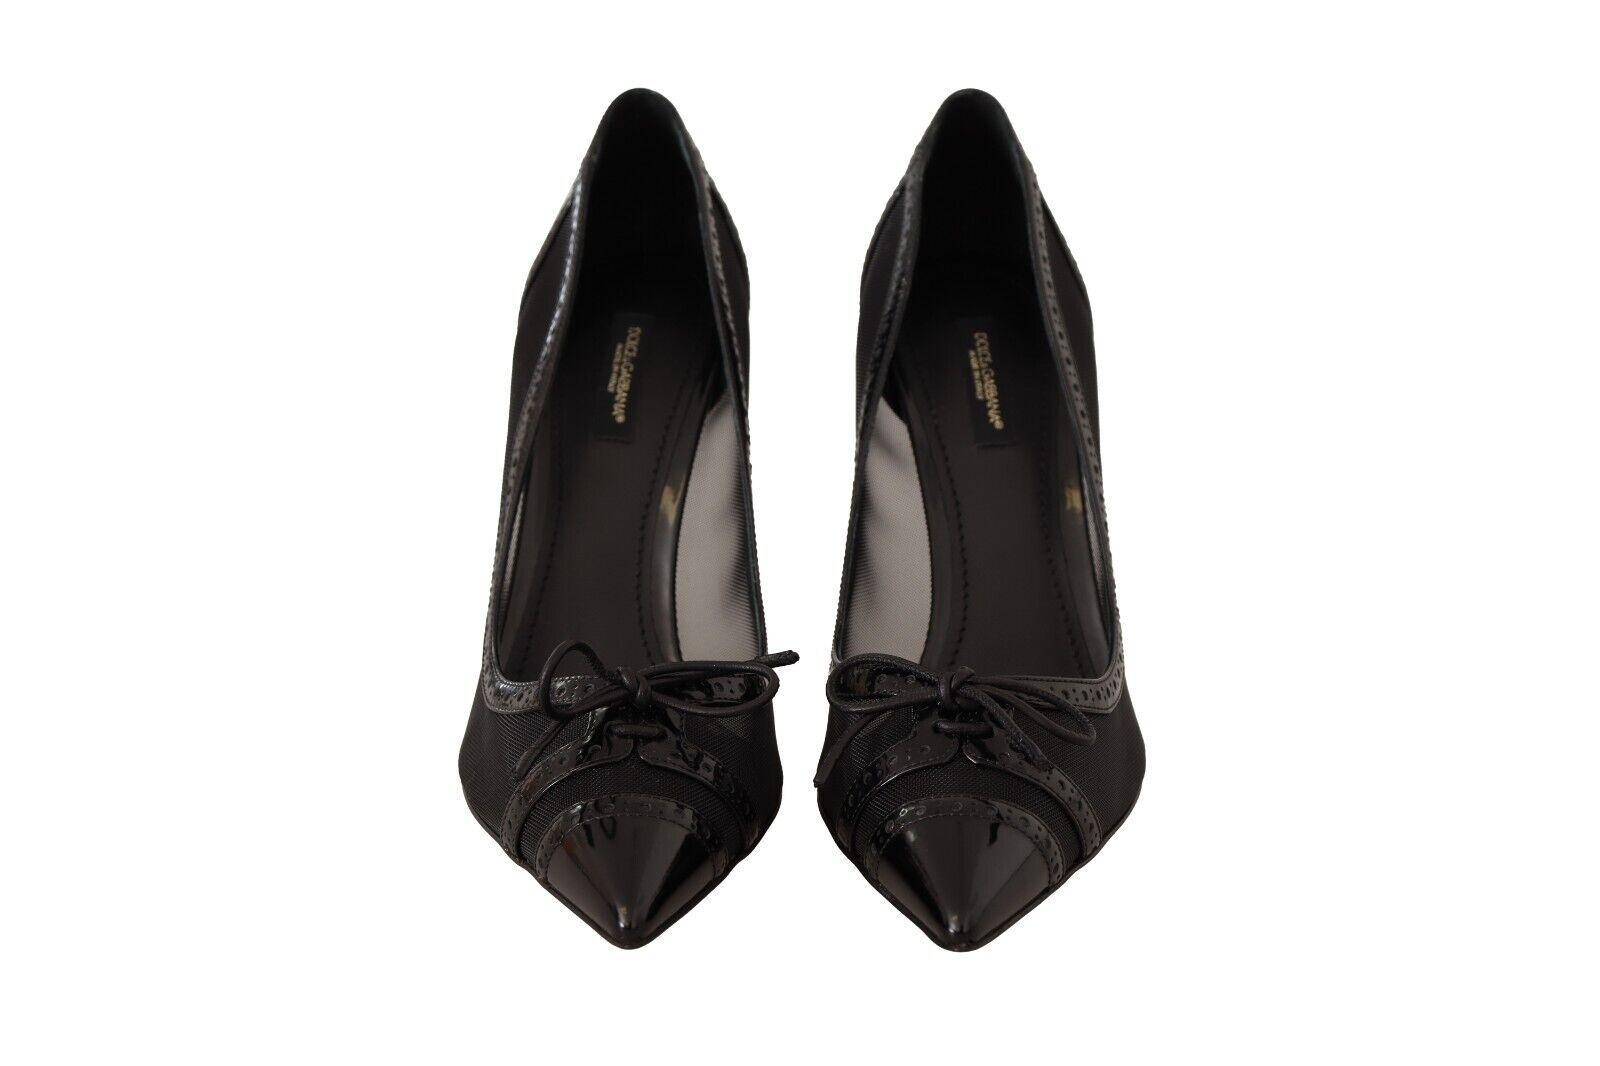 Dolce & Gabbana Black Mesh Leather Pointed Heels Pumps Shoes - Designed by Dolce & Gabbana Available to Buy at a Discounted Price on Moon Behind The Hill Online Designer Discount Store